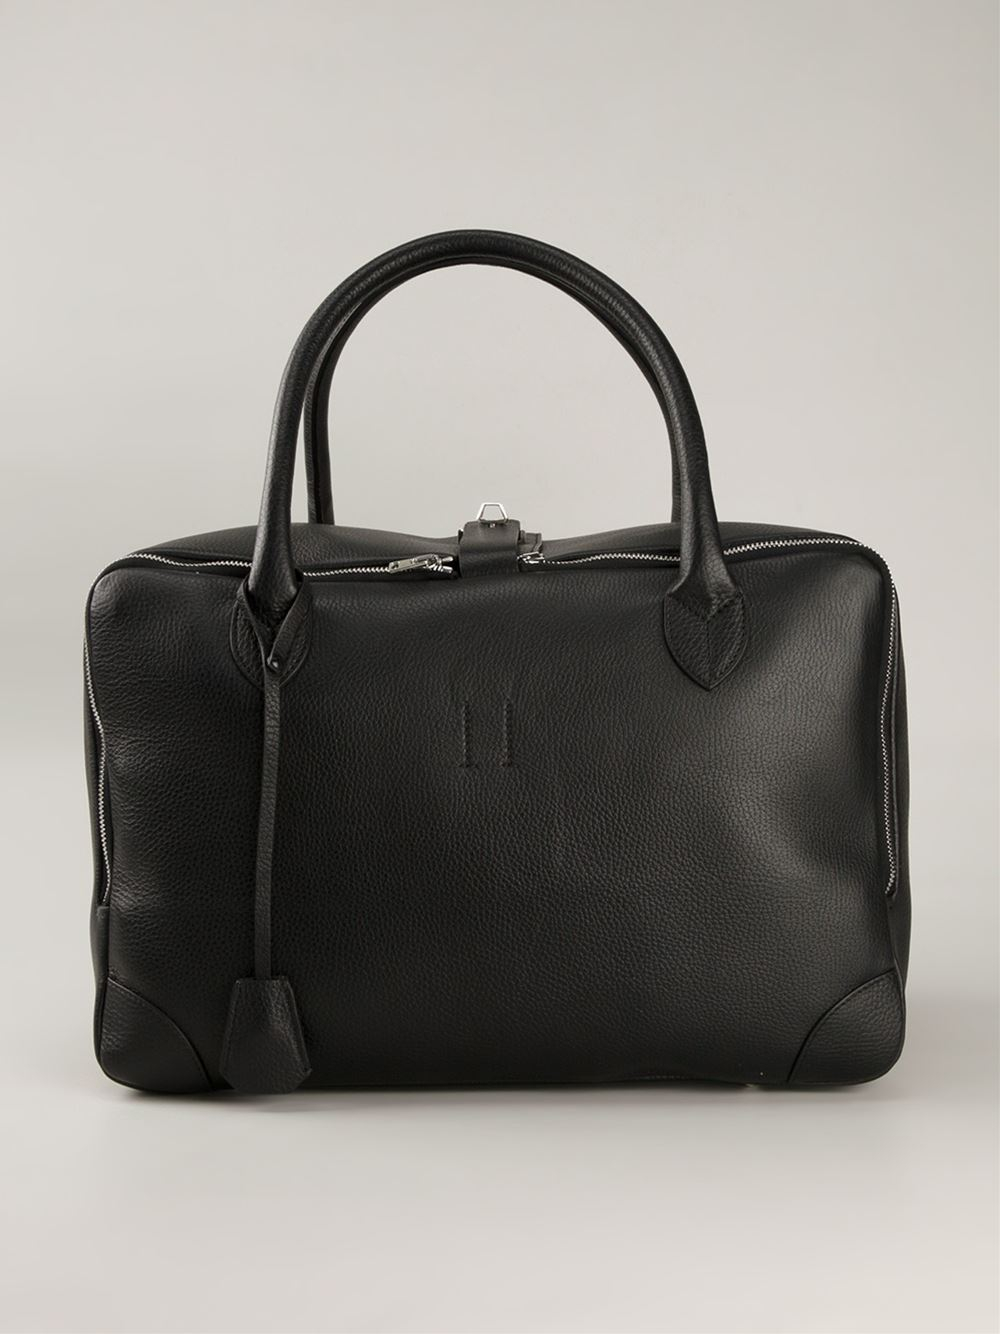 Lyst - Golden Goose Deluxe Brand 'Equipage' Tote Bag in Black